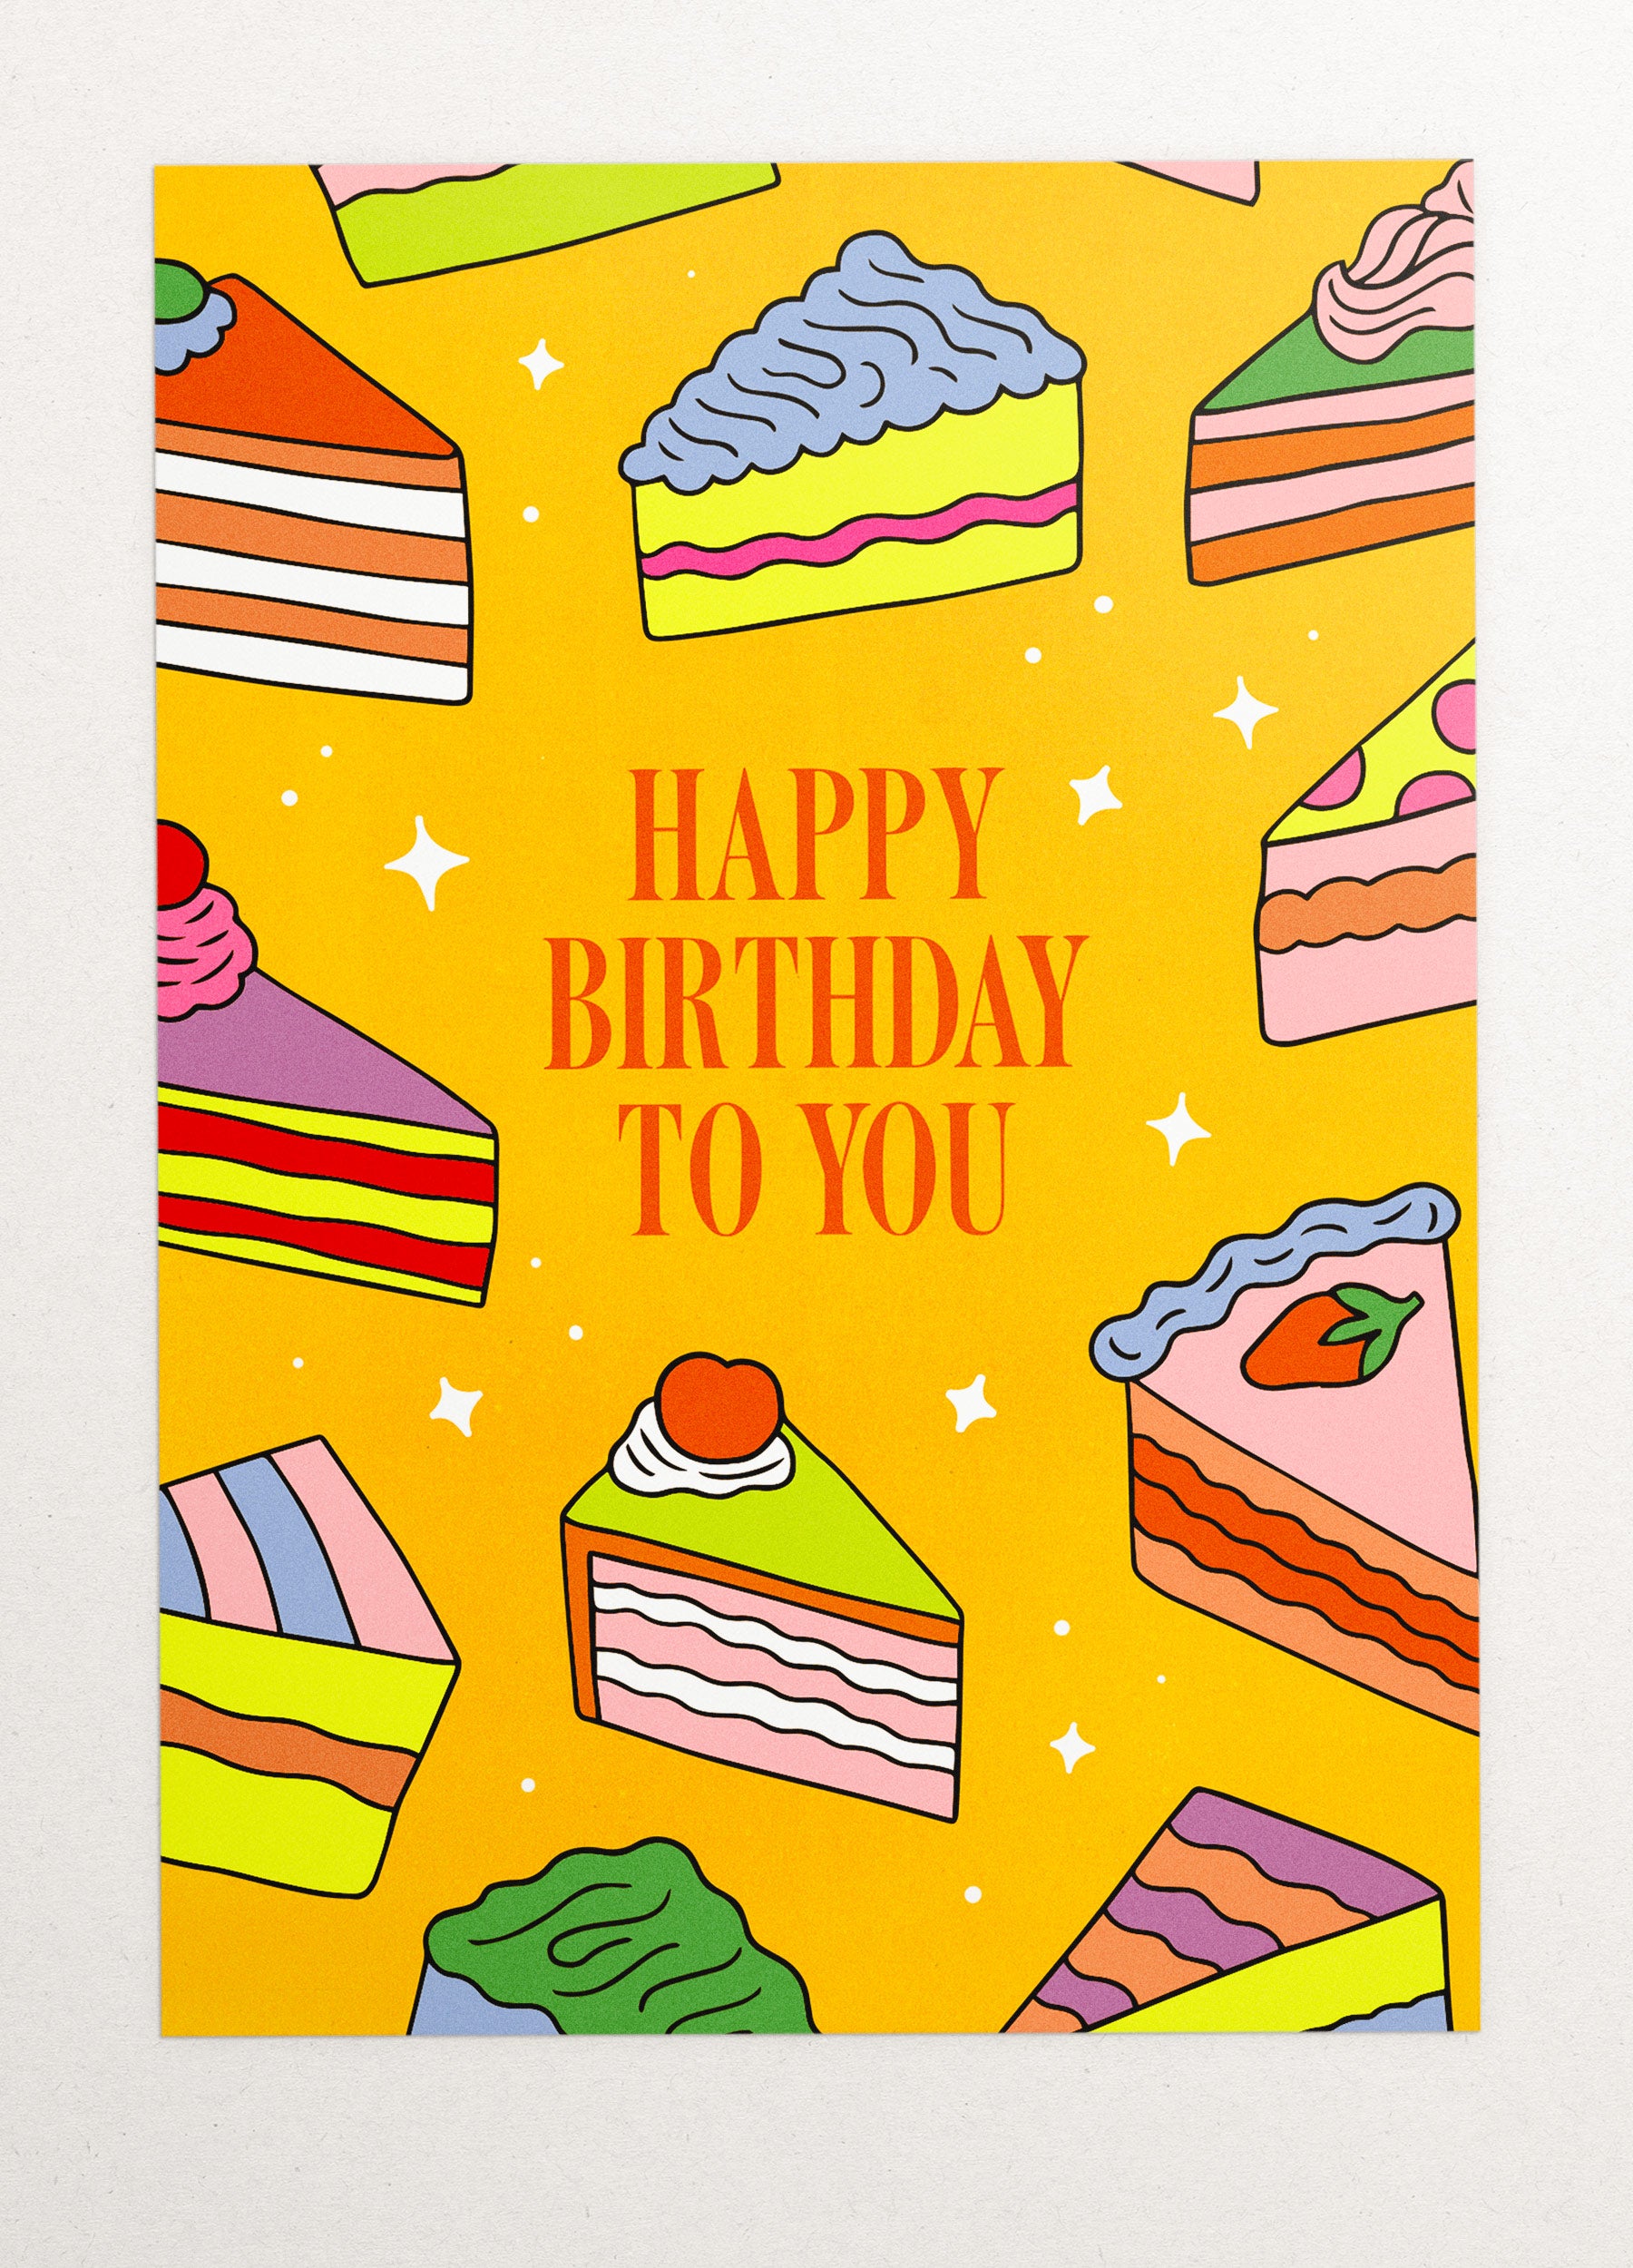 This is an image of a greeting card by Kiosk, that is illustrated by Georgia Perry. The card has a yellow background and illustrations of different types of cake slices scattered across the background. The cakes are in different colors and styles, including pink, green, and orange. The text on the card reads “Happy Birthday to You” in white letters. There are also small white stars scattered across the background.